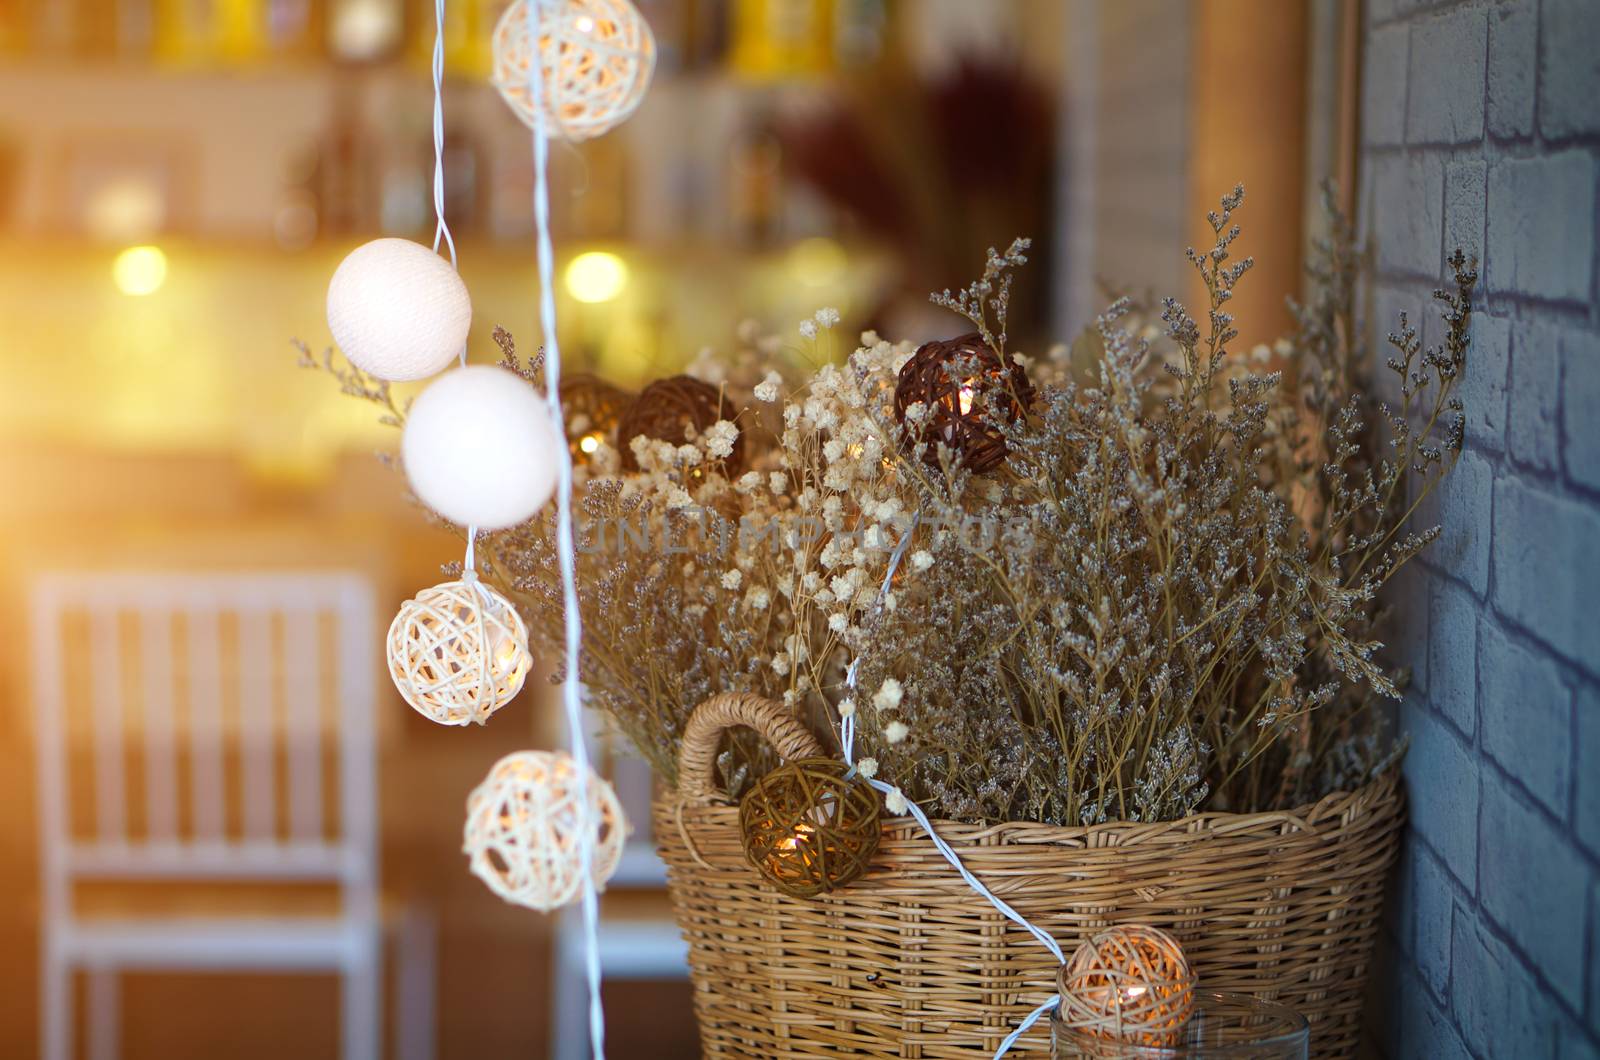 Dried flowers in a vase made of Basket of wood and bokeh light. The interior of the restaurant.